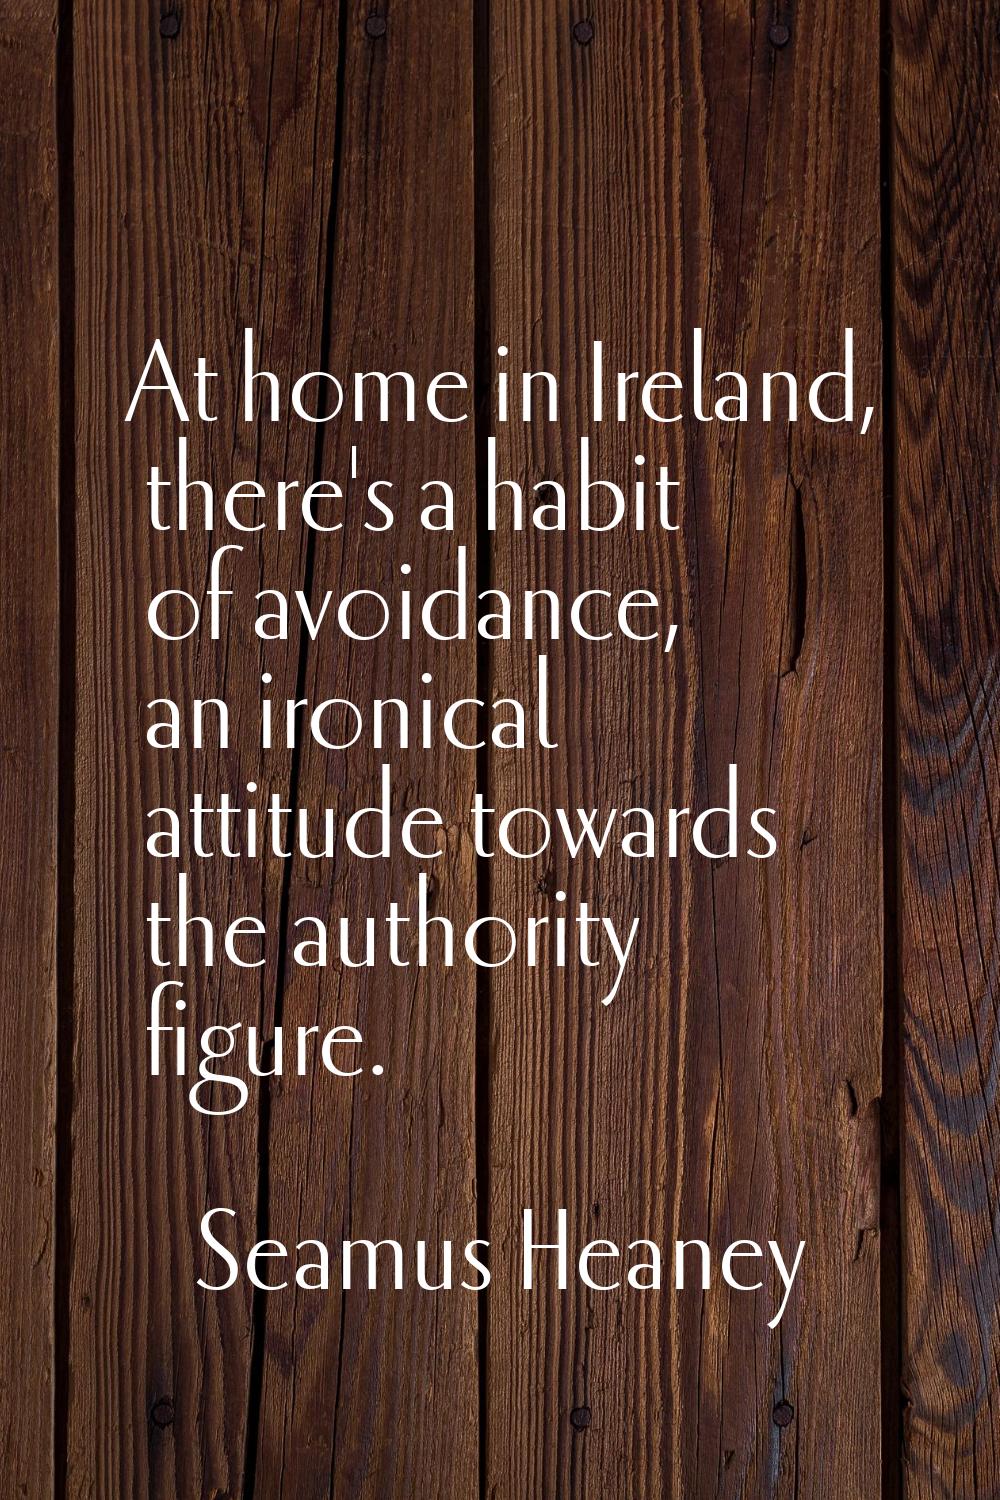 At home in Ireland, there's a habit of avoidance, an ironical attitude towards the authority figure